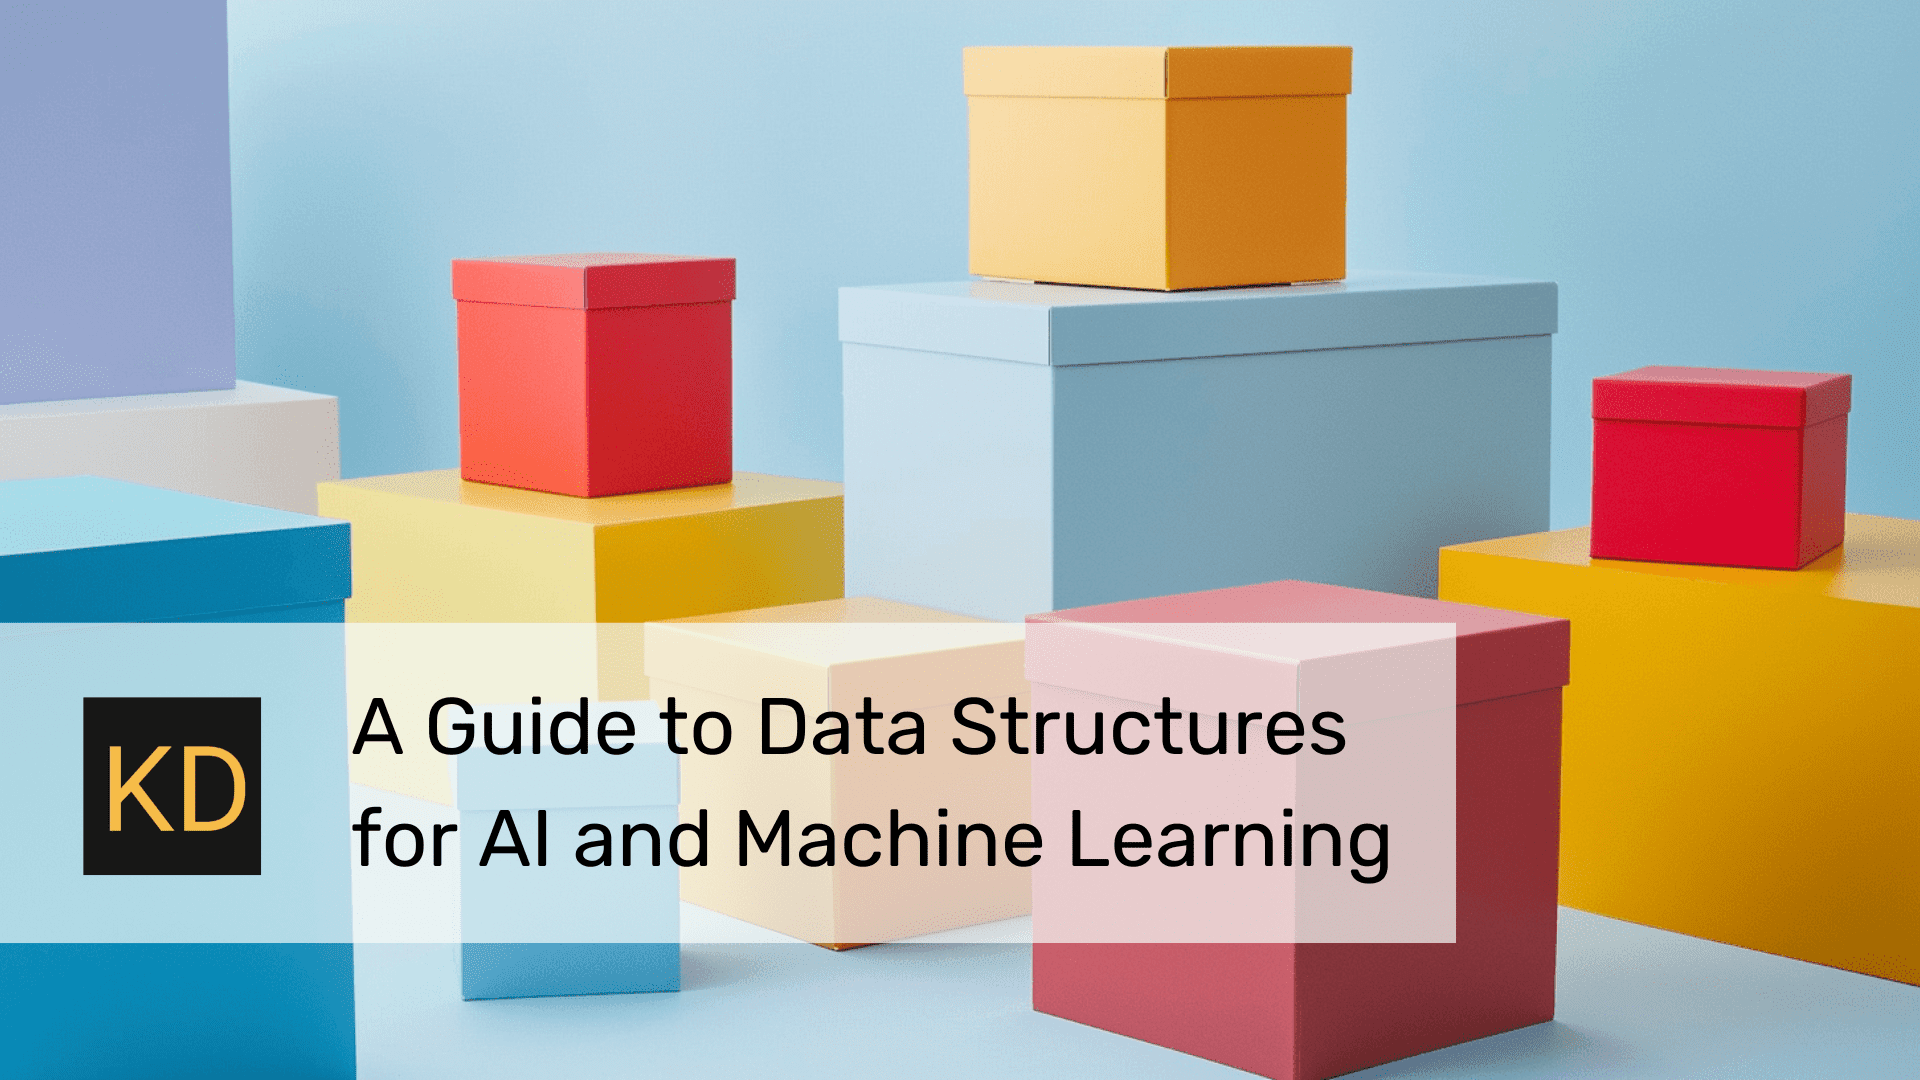 A Starter Guide to Data Structures for AI and Machine Learning